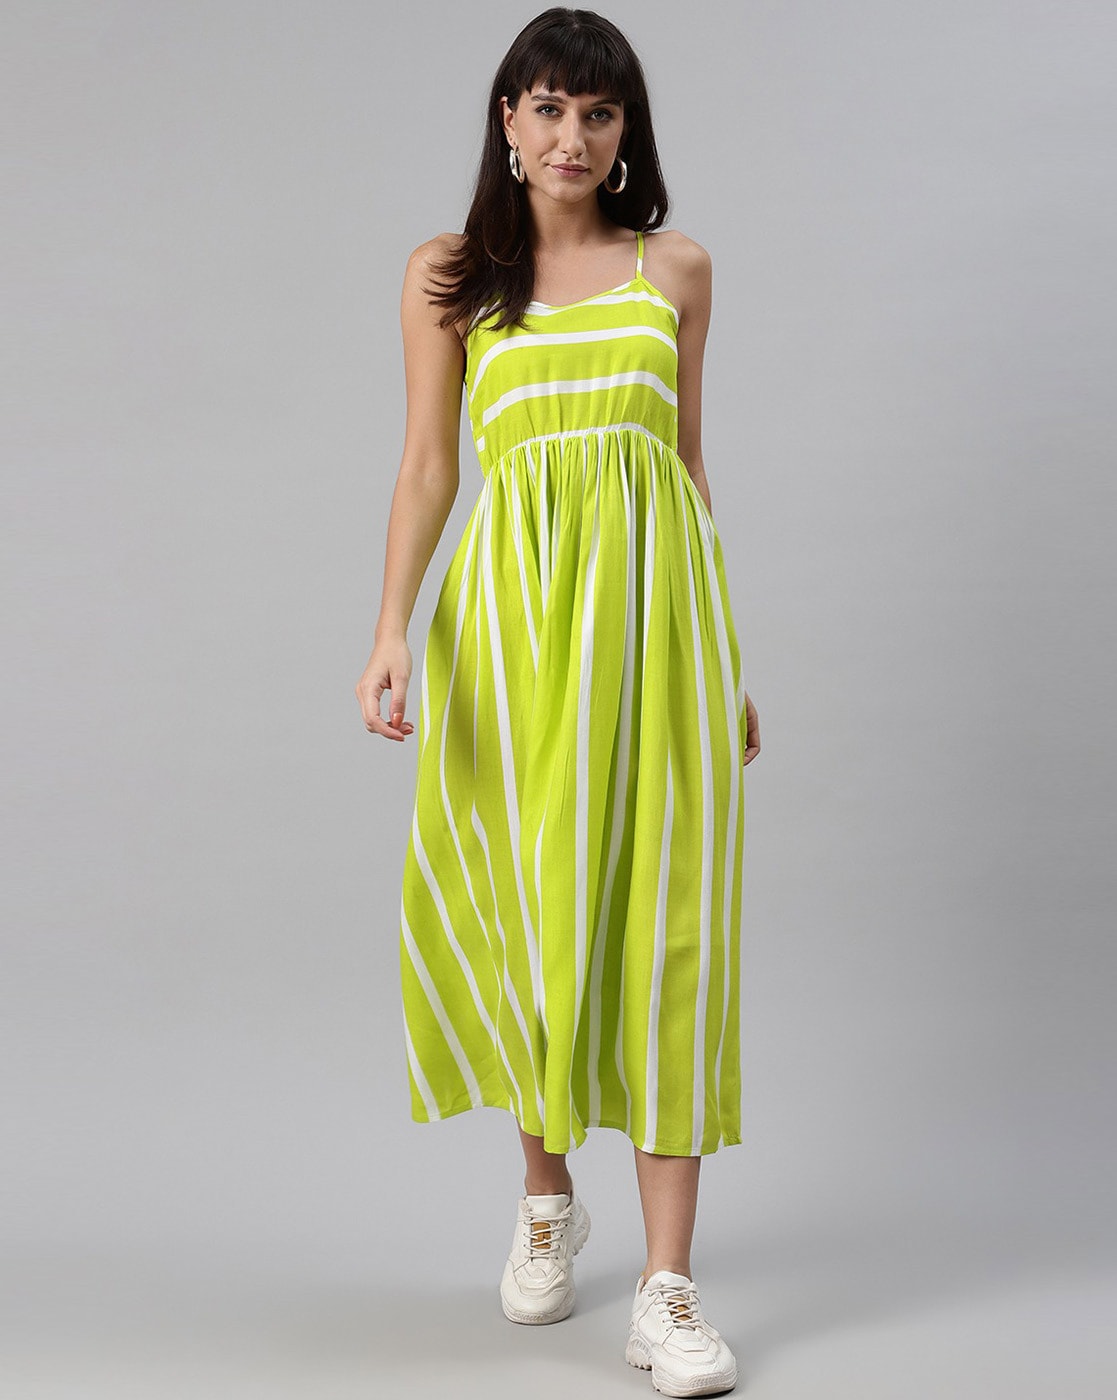 Aggregate more than 232 neon color dress best